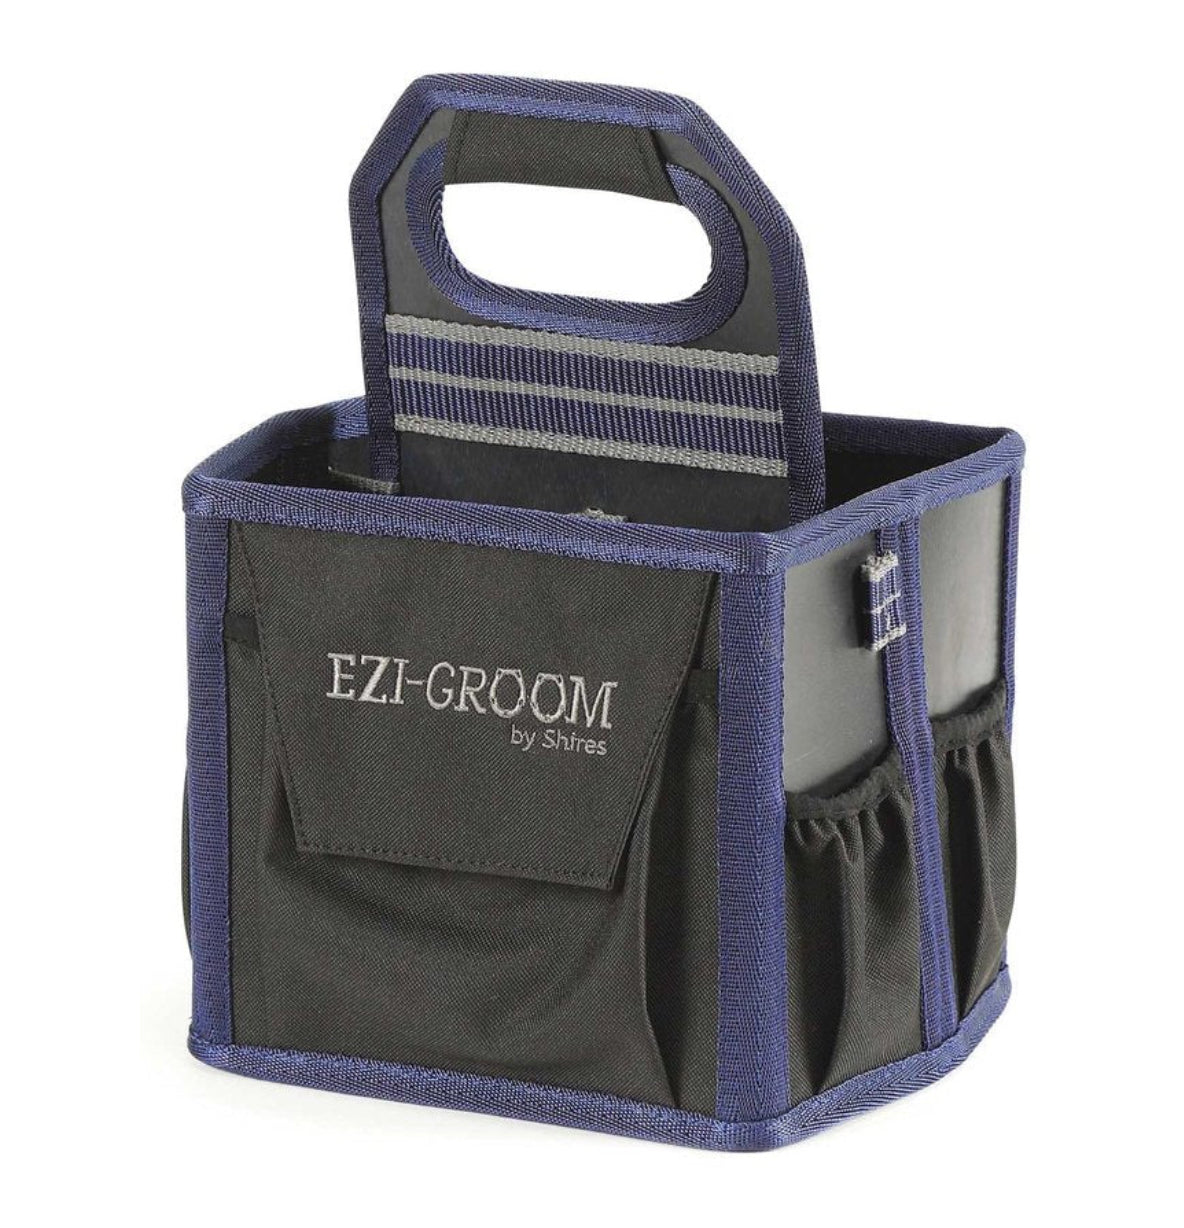 EZI-Groom Tote by Shires